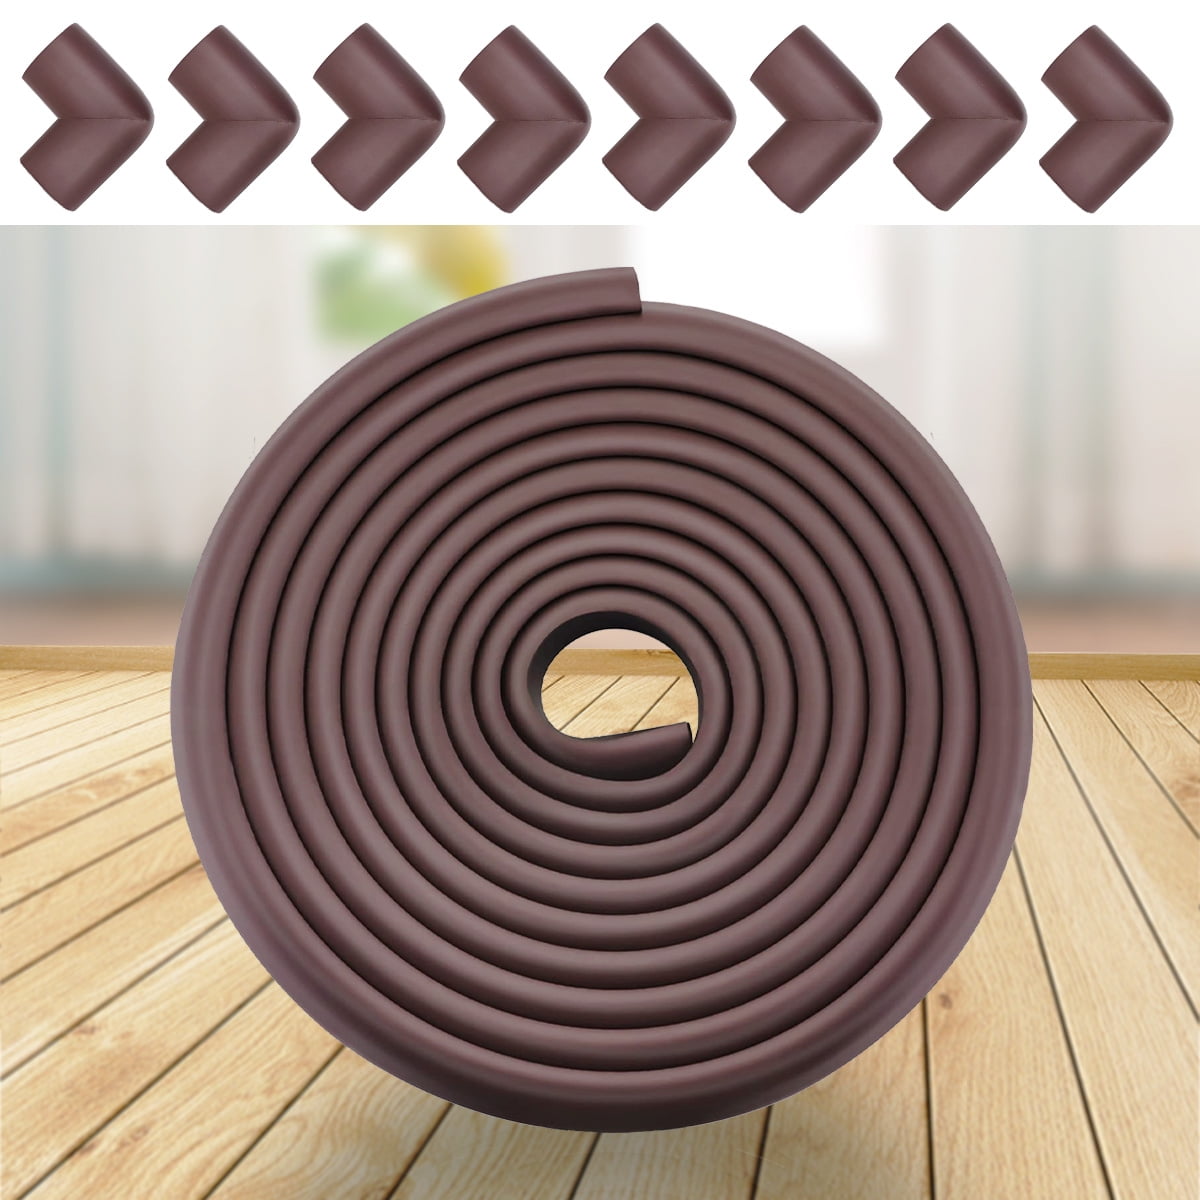 Child Safety Furniture Bumper | Coffee Brown Baby Proofing Edge & Corner Guards Pre-Taped Corners Table Protectors 20.4 ft 18 ft Edge + 8 Corners Safe Edge & Corner Cushion Roving Cove 